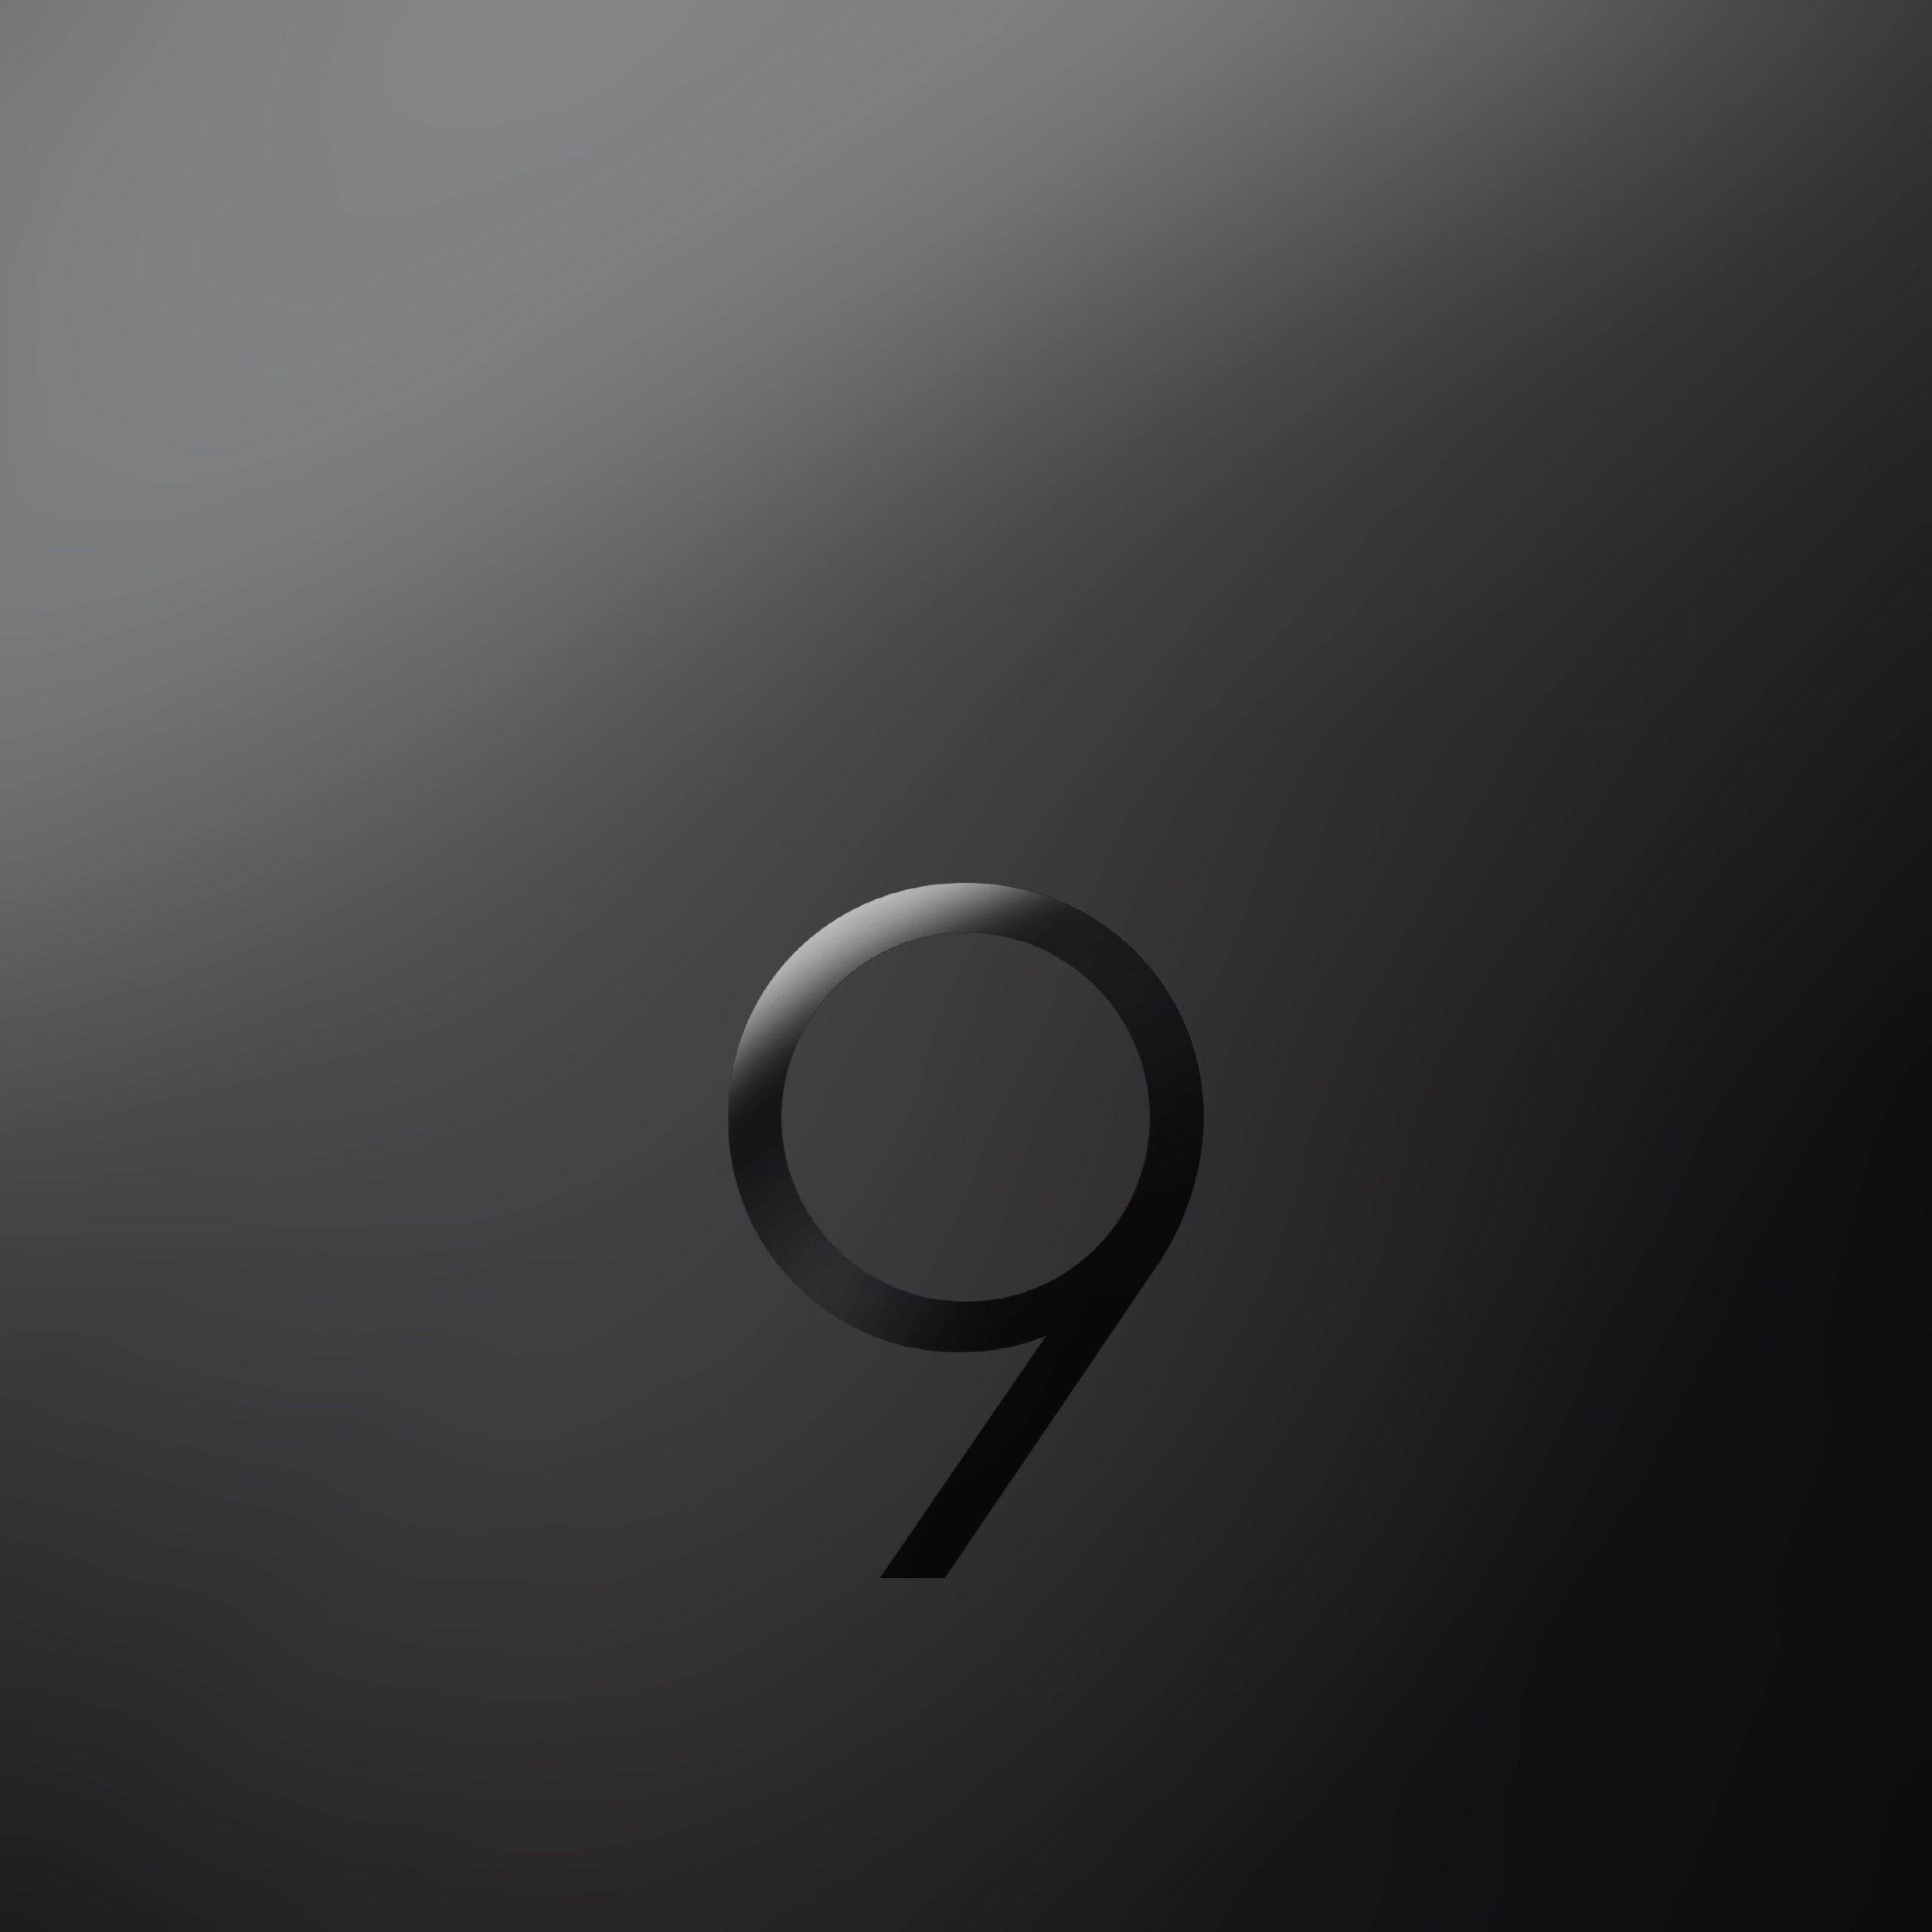 Samsung Galaxy S9 Stock Wallpapers (12)